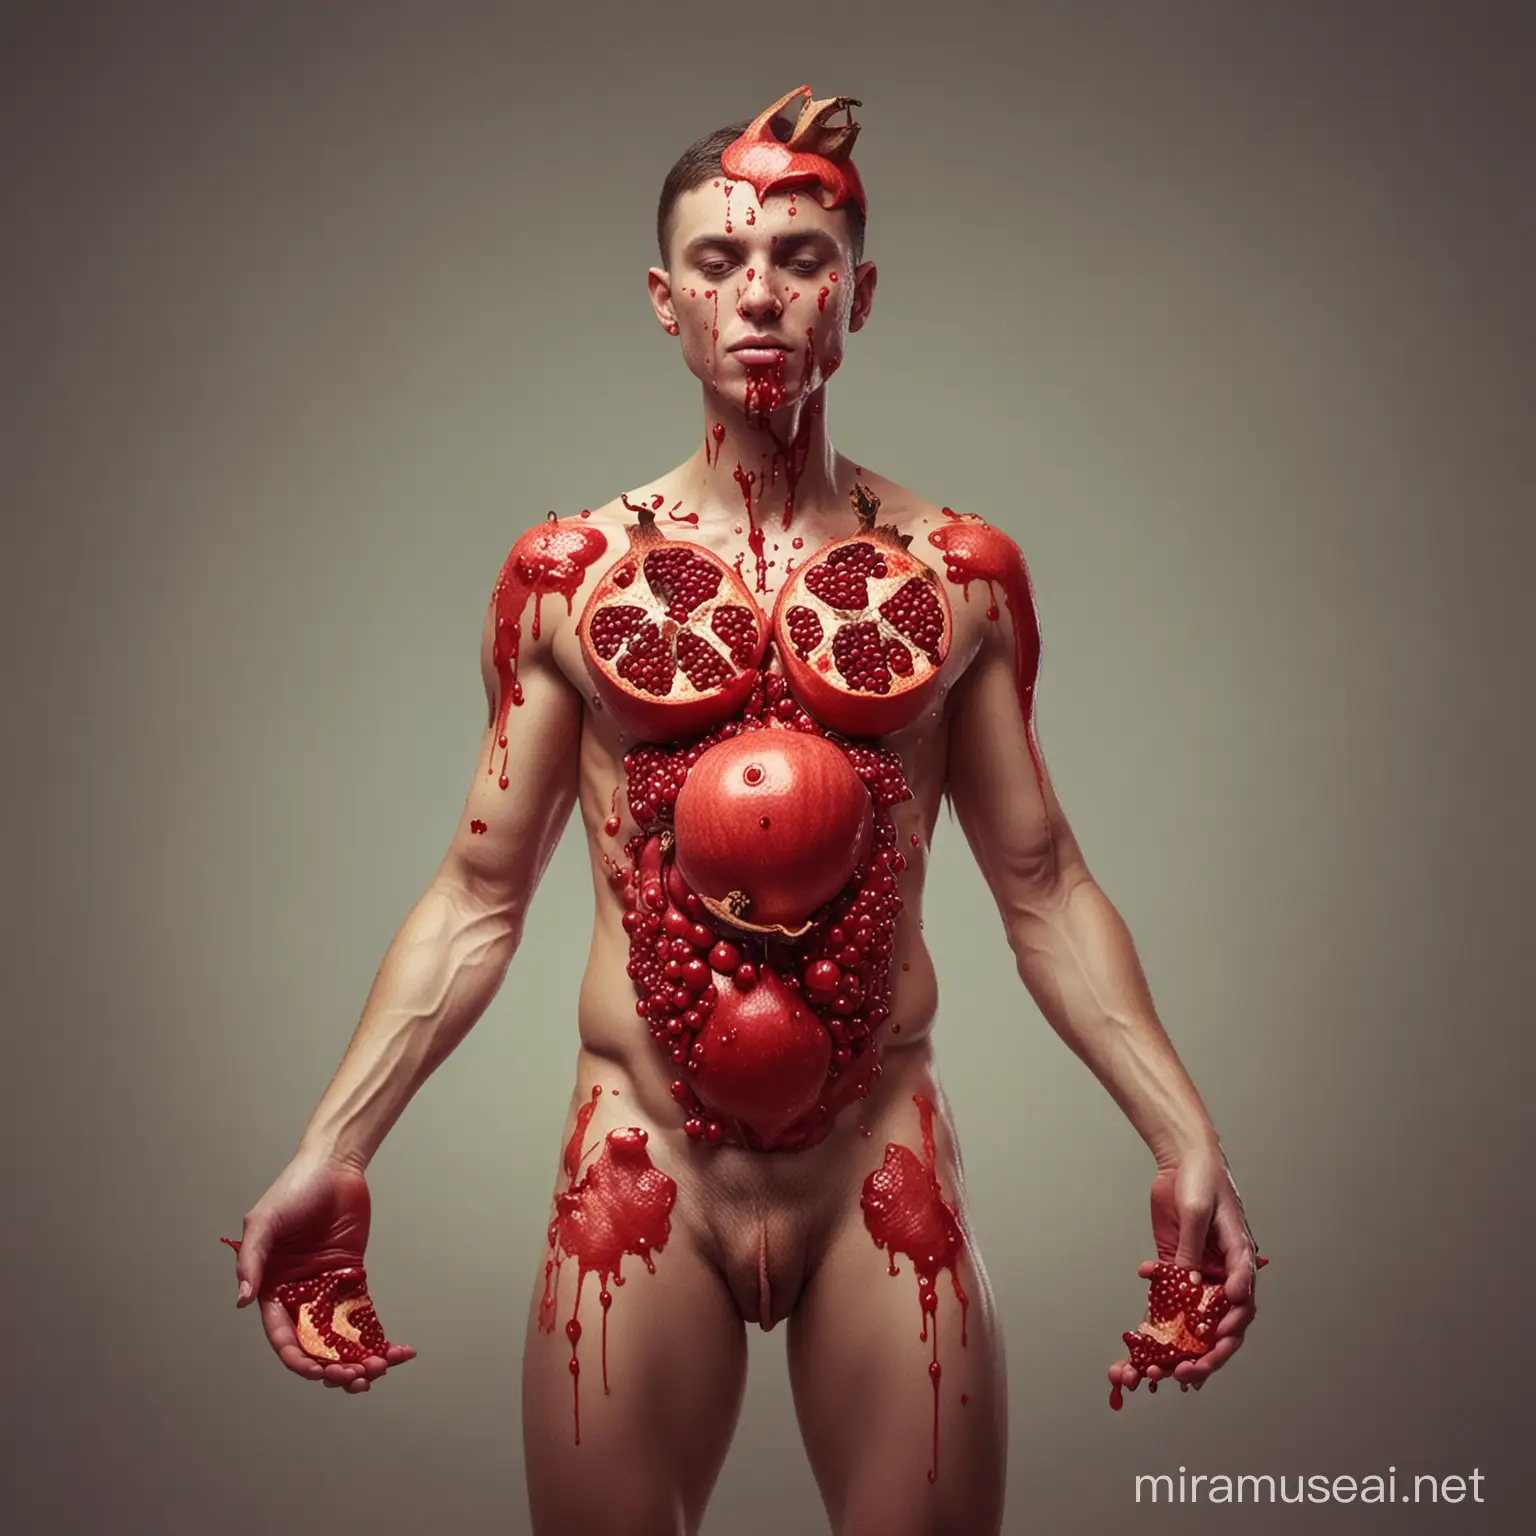 human with a pomegranate body. Put the pomegranates on the body, as bodyparts. cuts with a knife. surreal
